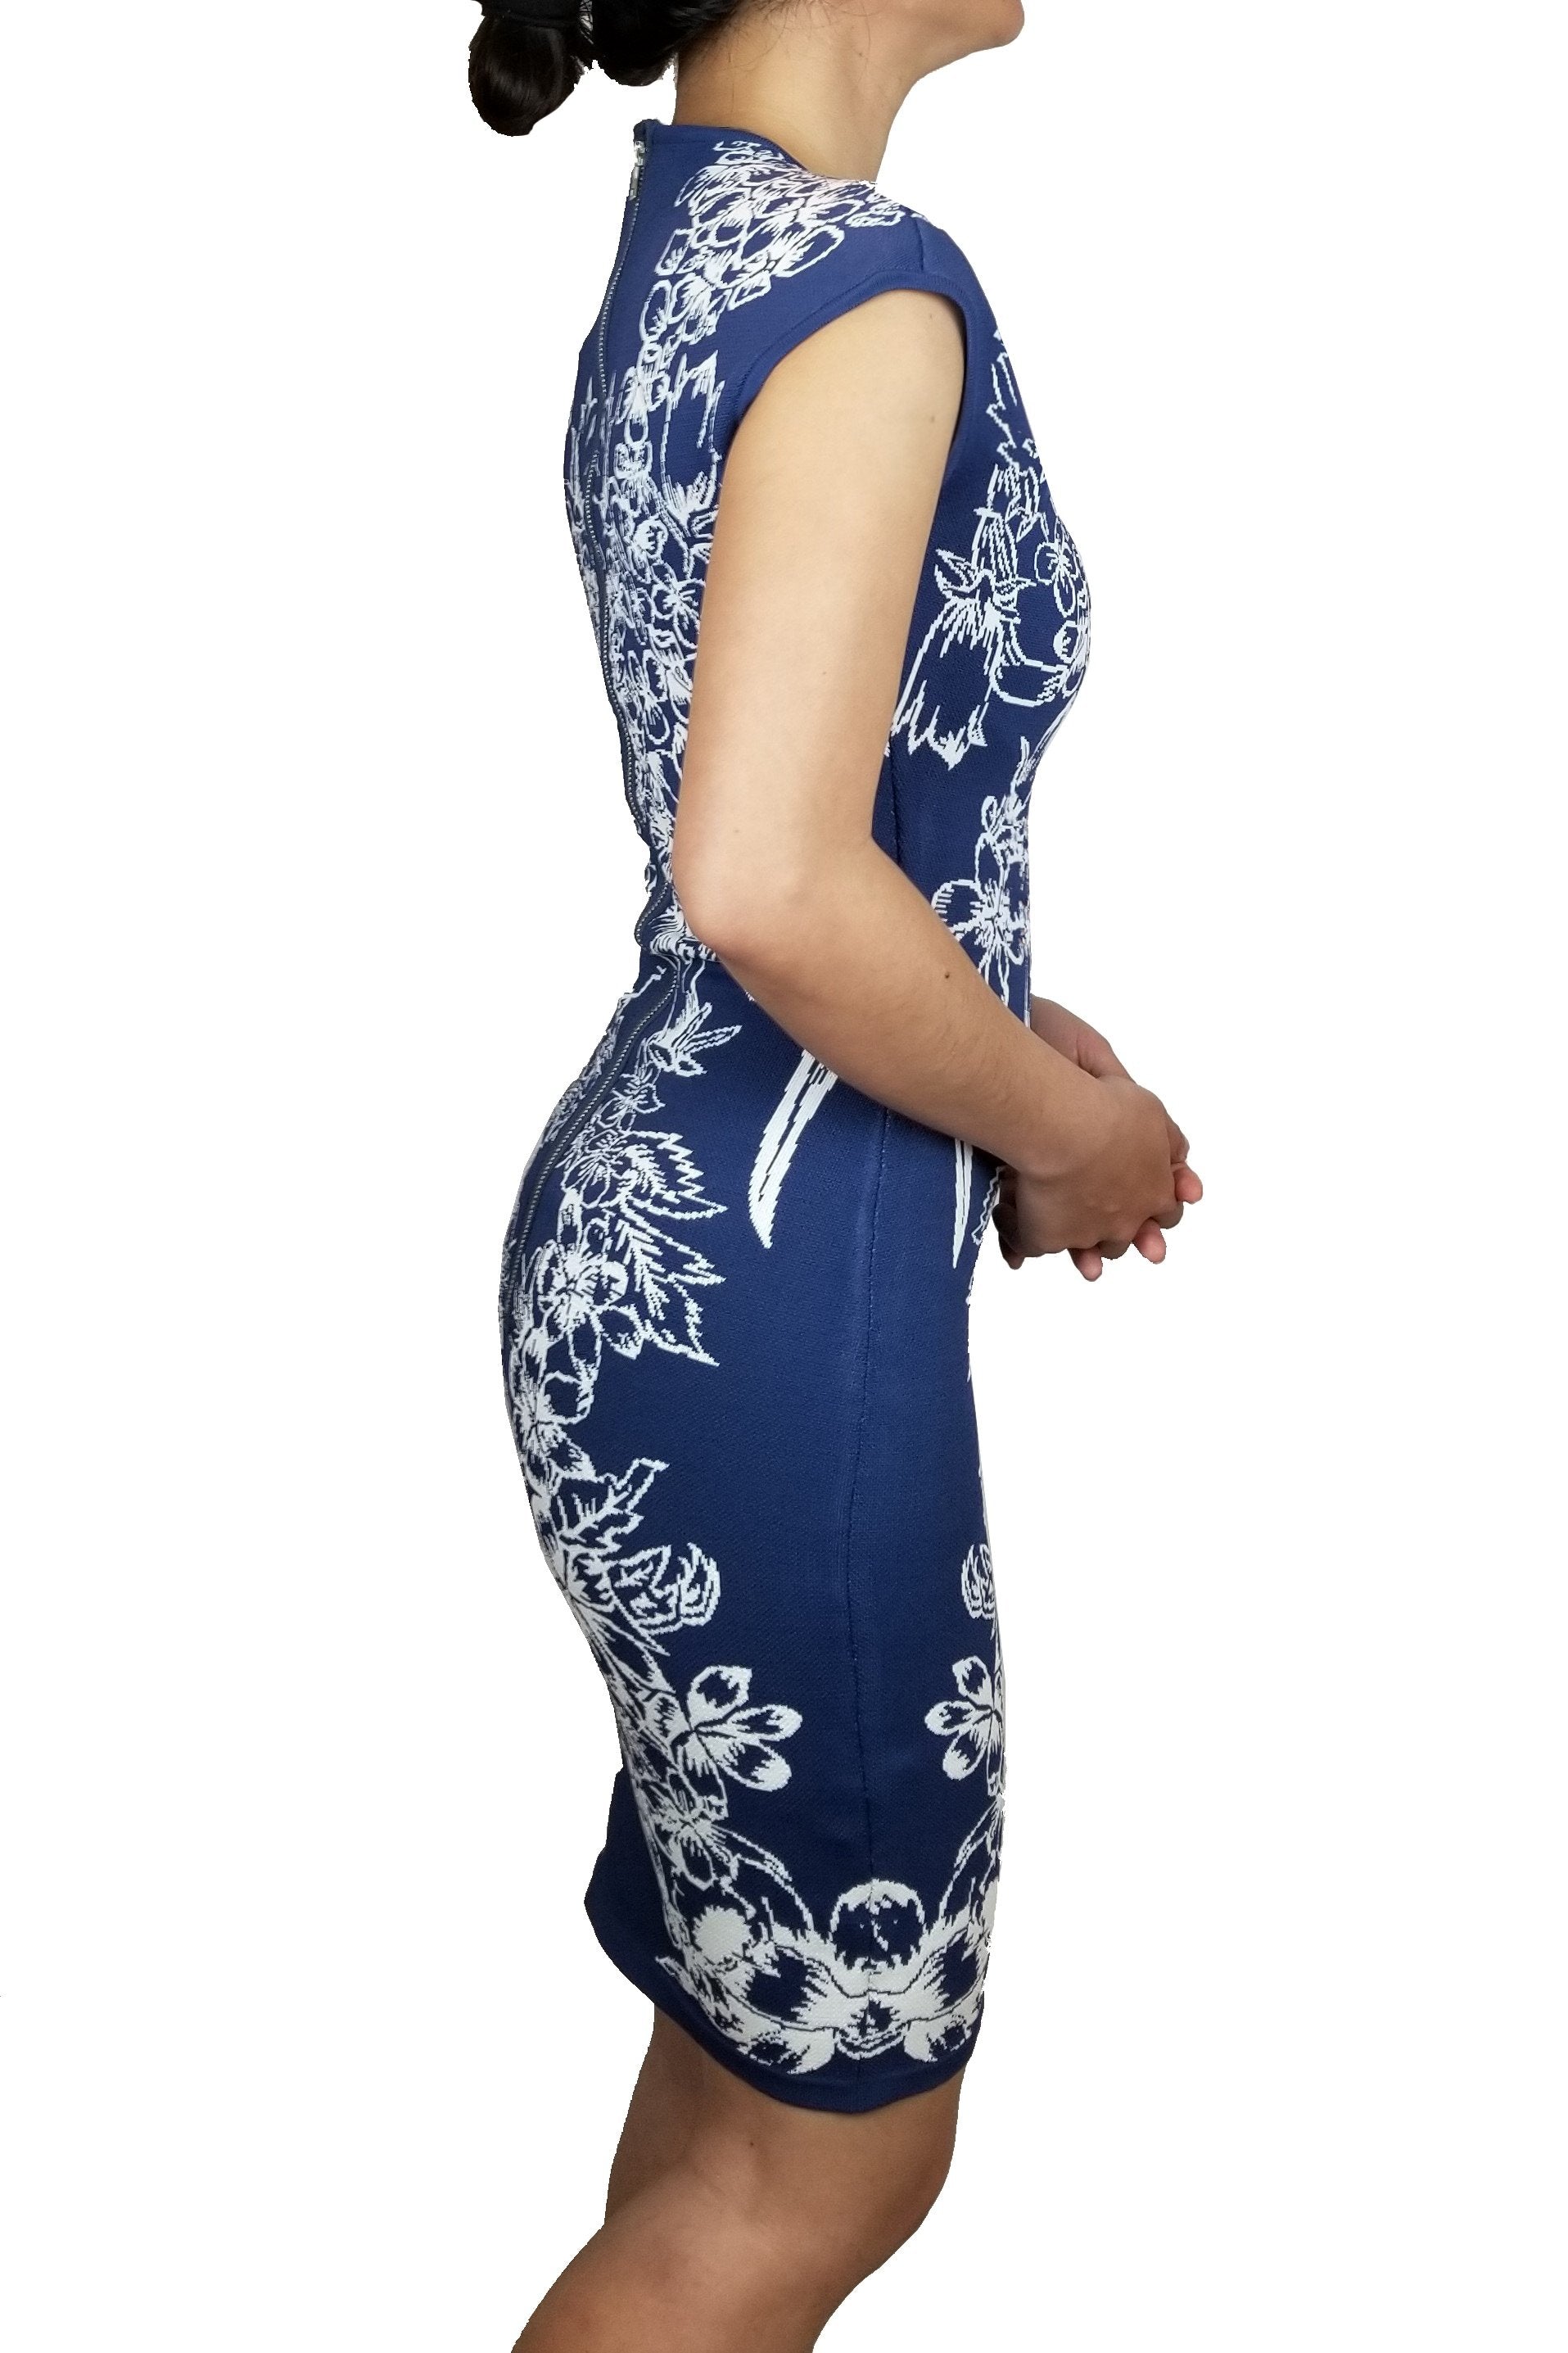 BCBGMAXAZRIA Elegant Bodycon Floral Dress , Very unique white and blue floral design. Ridiculously flattering bodycon fit that traces your silhouette. Thick fabric with slight stretch. Fits small, Blue, White, 86% Rayon, 13% Nylon, 1% Spandex, dress, fashion, women's bodycon fit dress, extra small women's dress, women's flattering body hugging dress, women's flower dress with thick fabric, featured